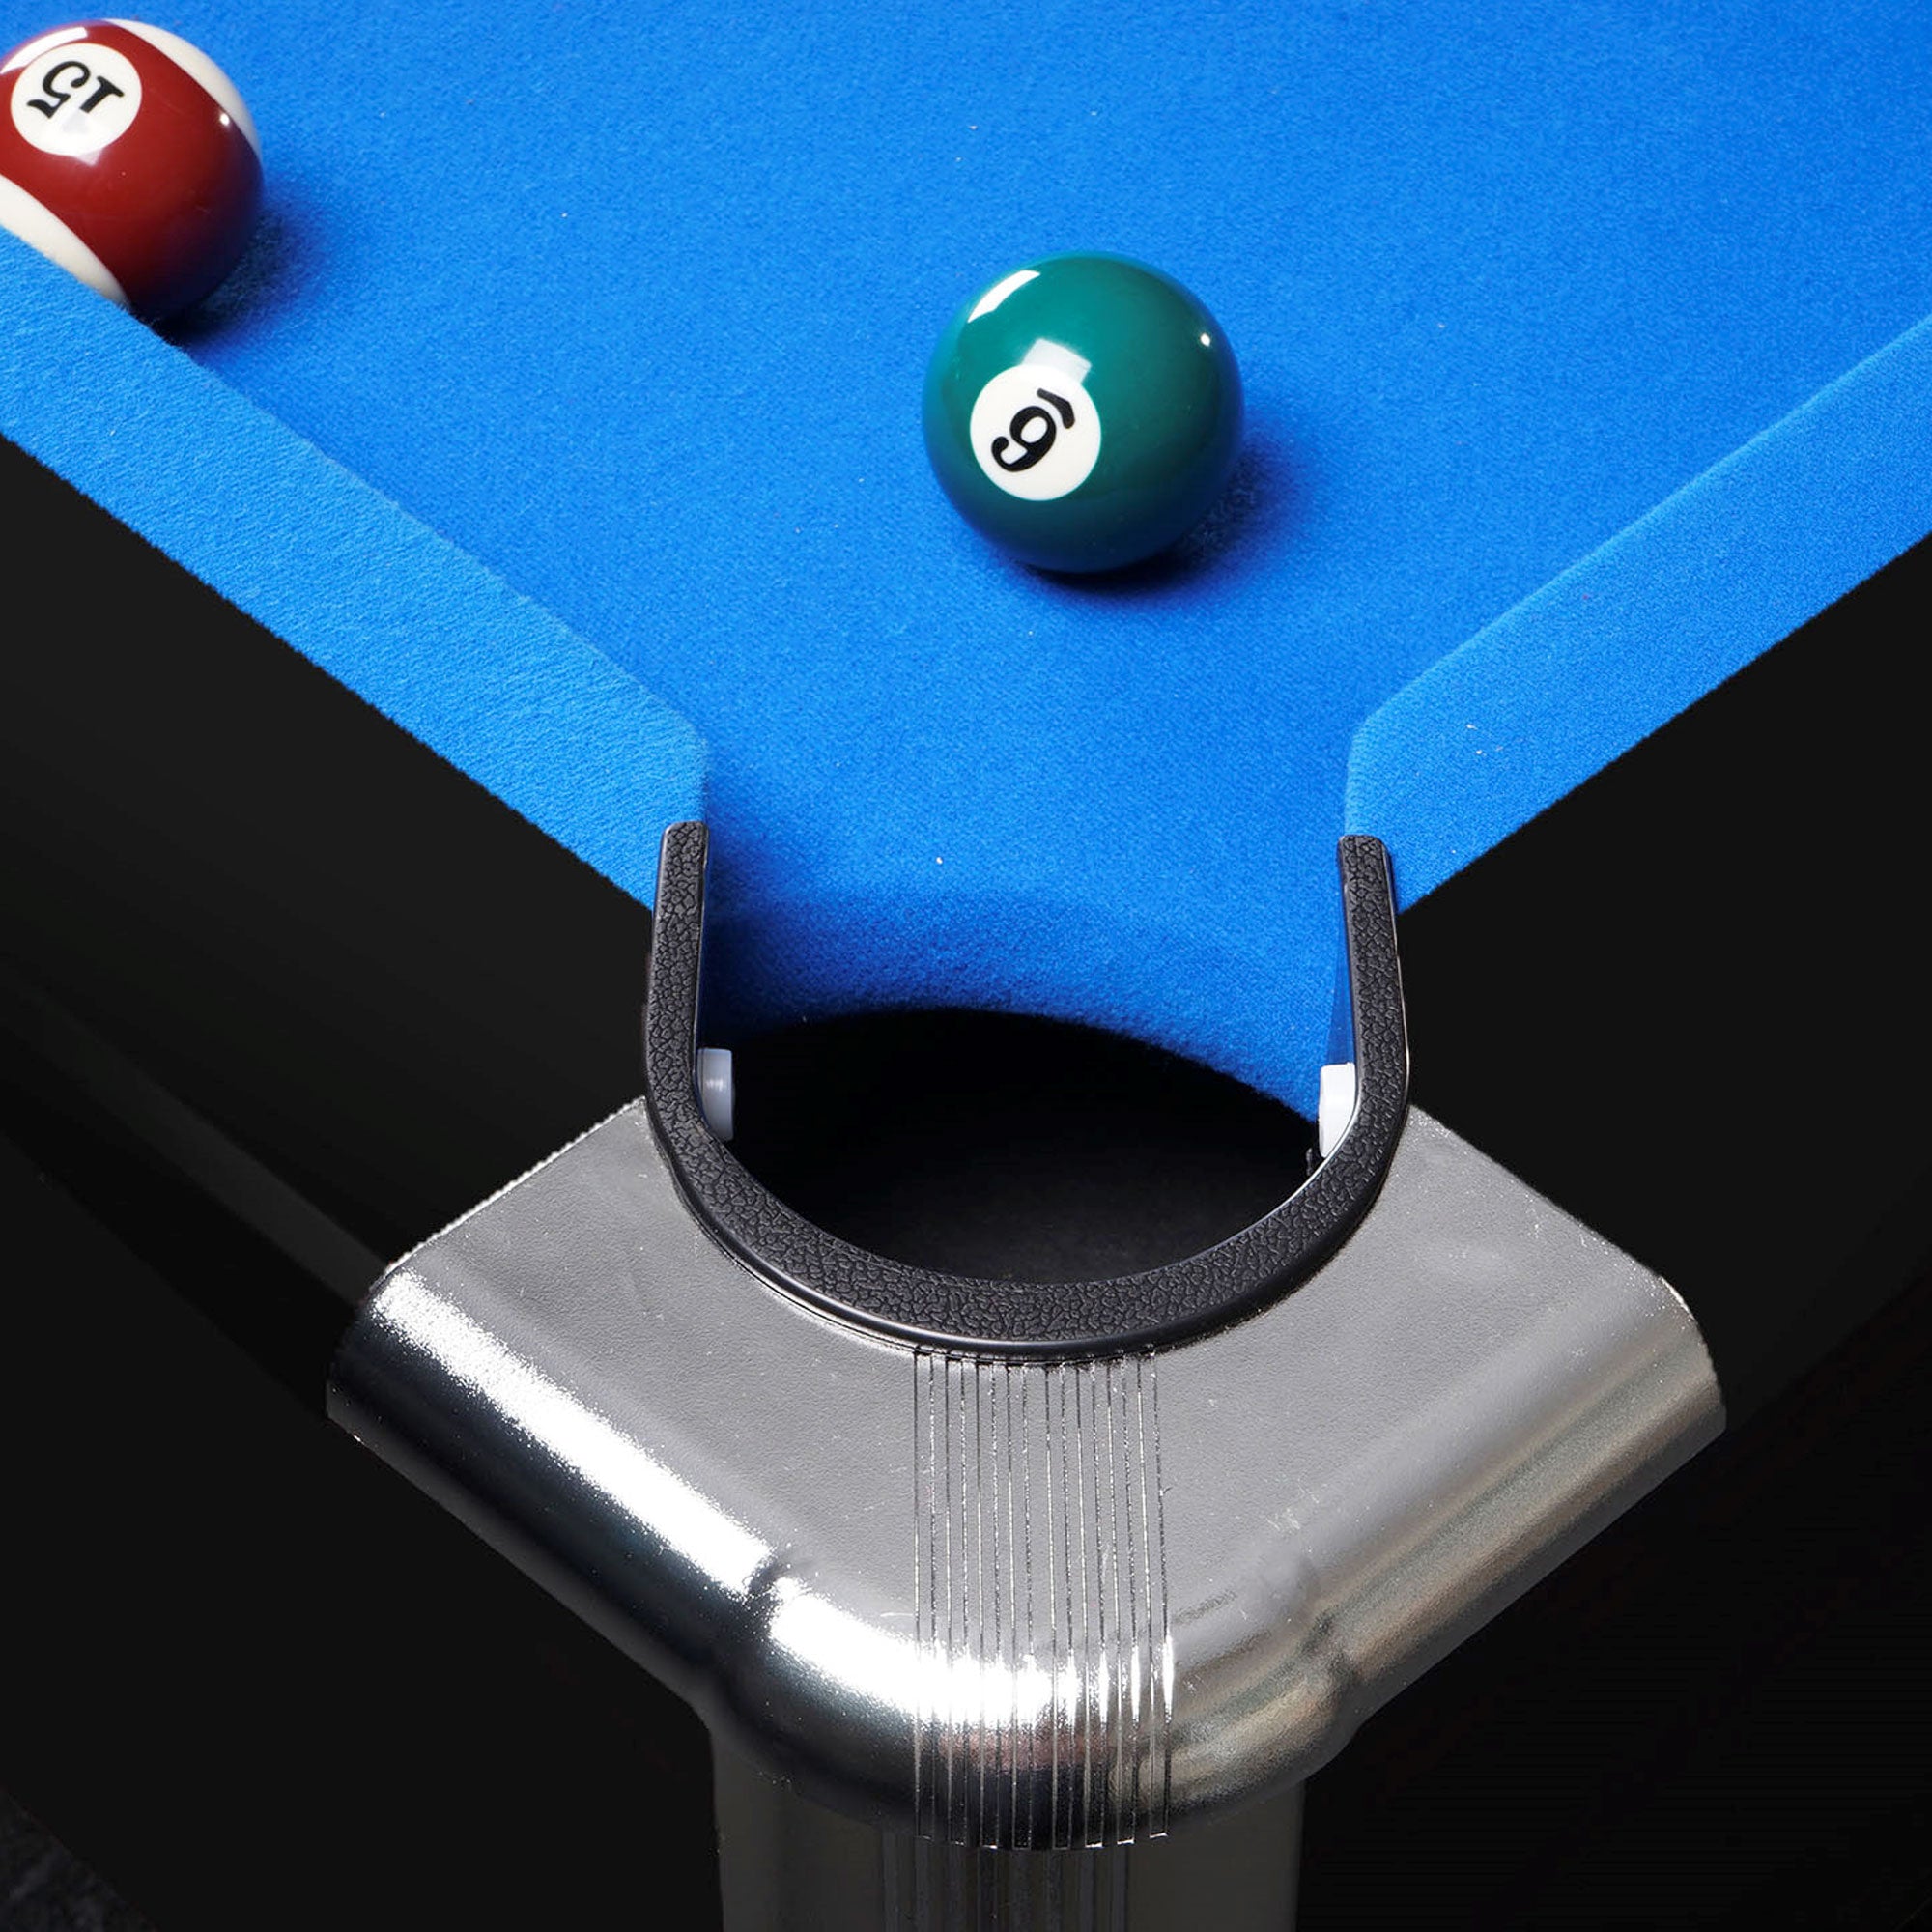 MACE 8FT LED Snooker Billiard Pool Table with Free Accessories